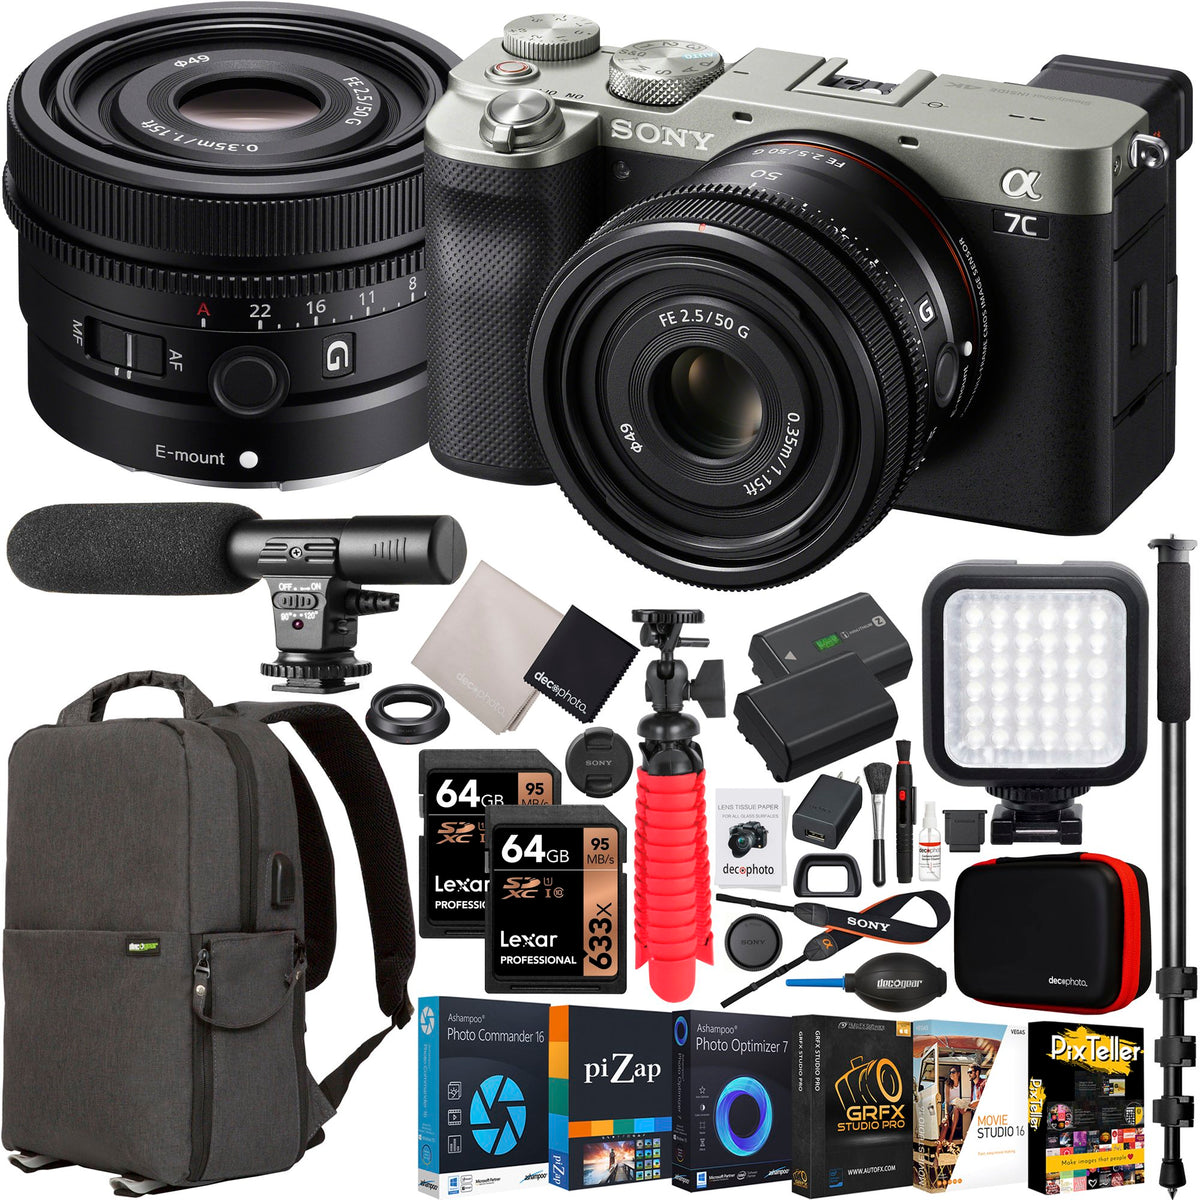  Sony Alpha 7C II Full-Frame Camera with 28-60mm Lens (Black)  Bundle with Lexar 64GB SD Card, Gadget Bag & More